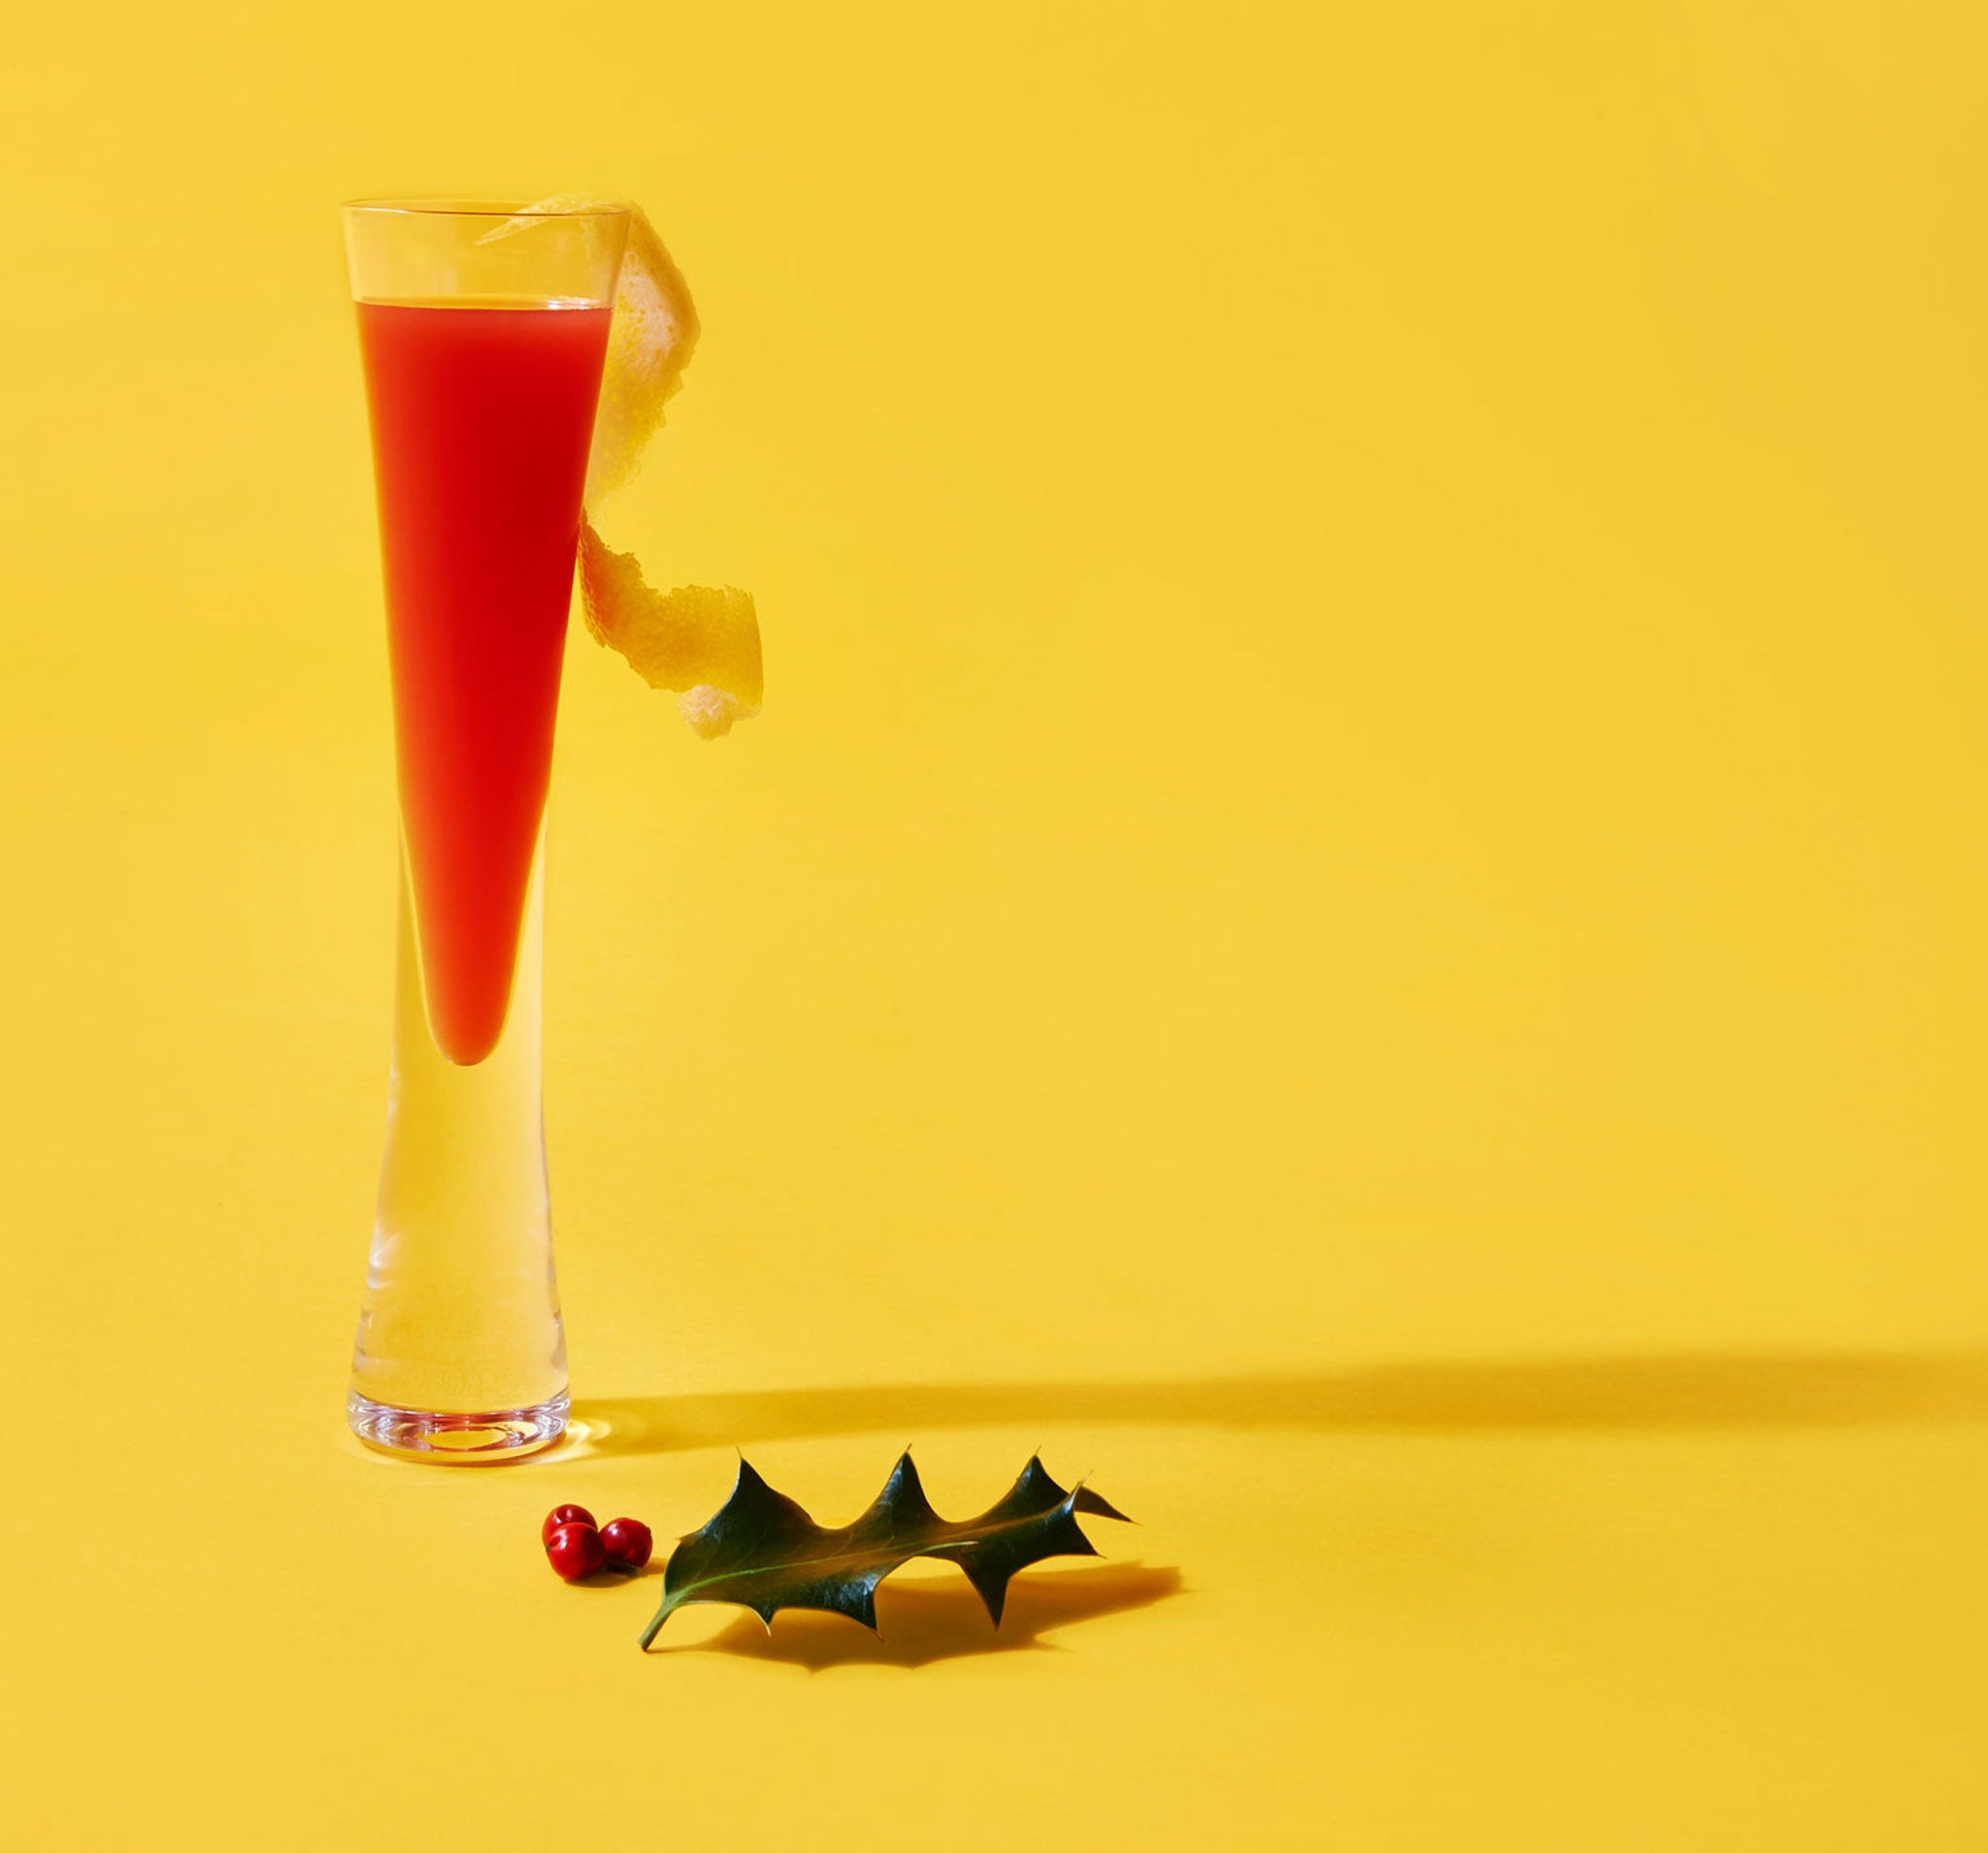 The Quo Vadis aperitivo is equal parts Campari and orange juice topped with prosecco – and sufficiently forgiving to permit a second glass